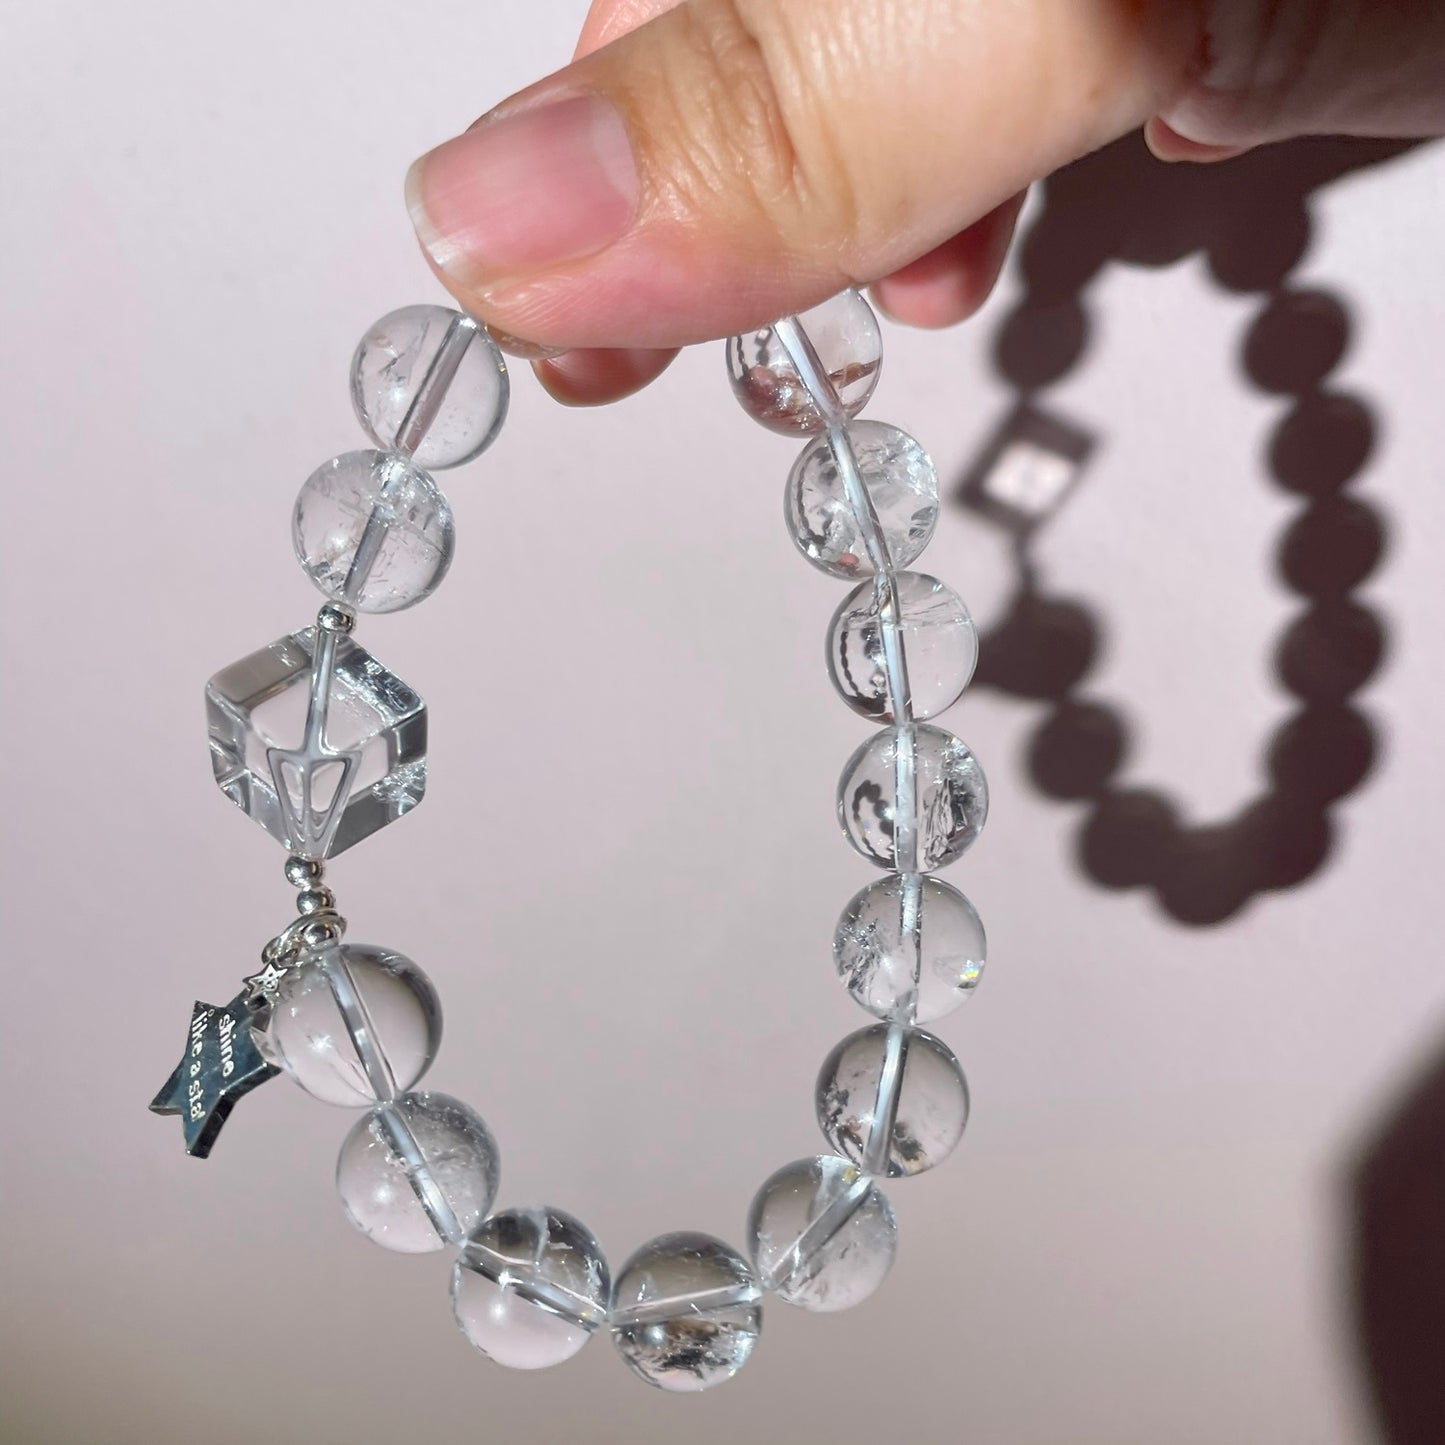 Natural high quality Clear Quartz bracelet, with S925 silver accessories